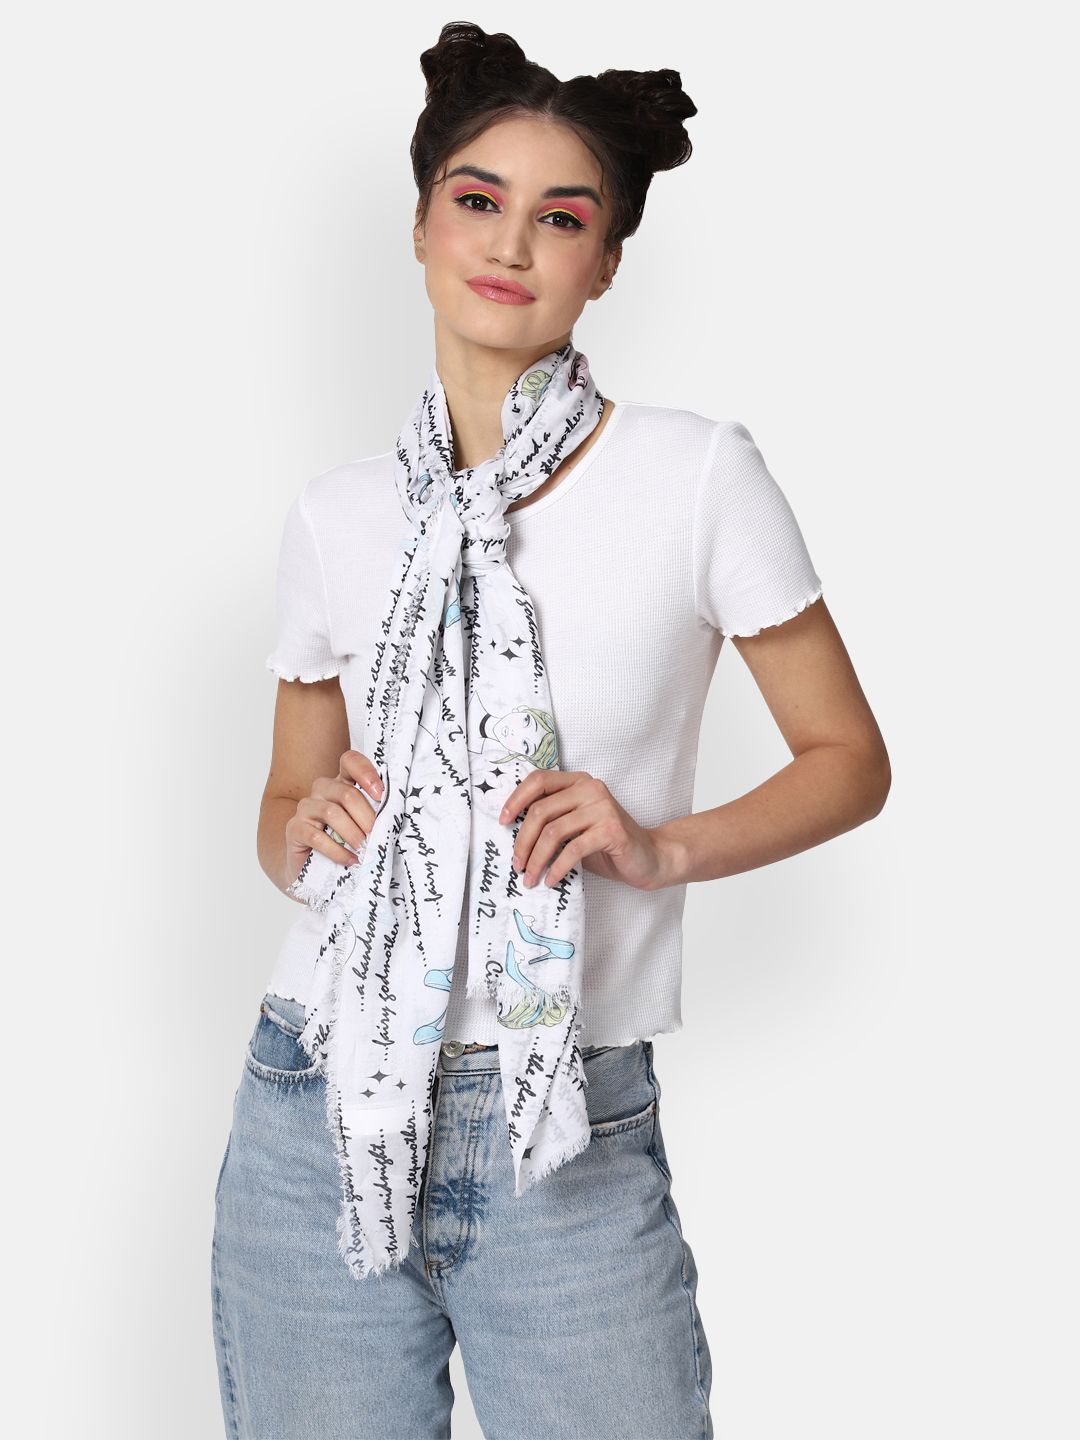 FOREVER 21 Women White & Black Printed Scarf Price in India